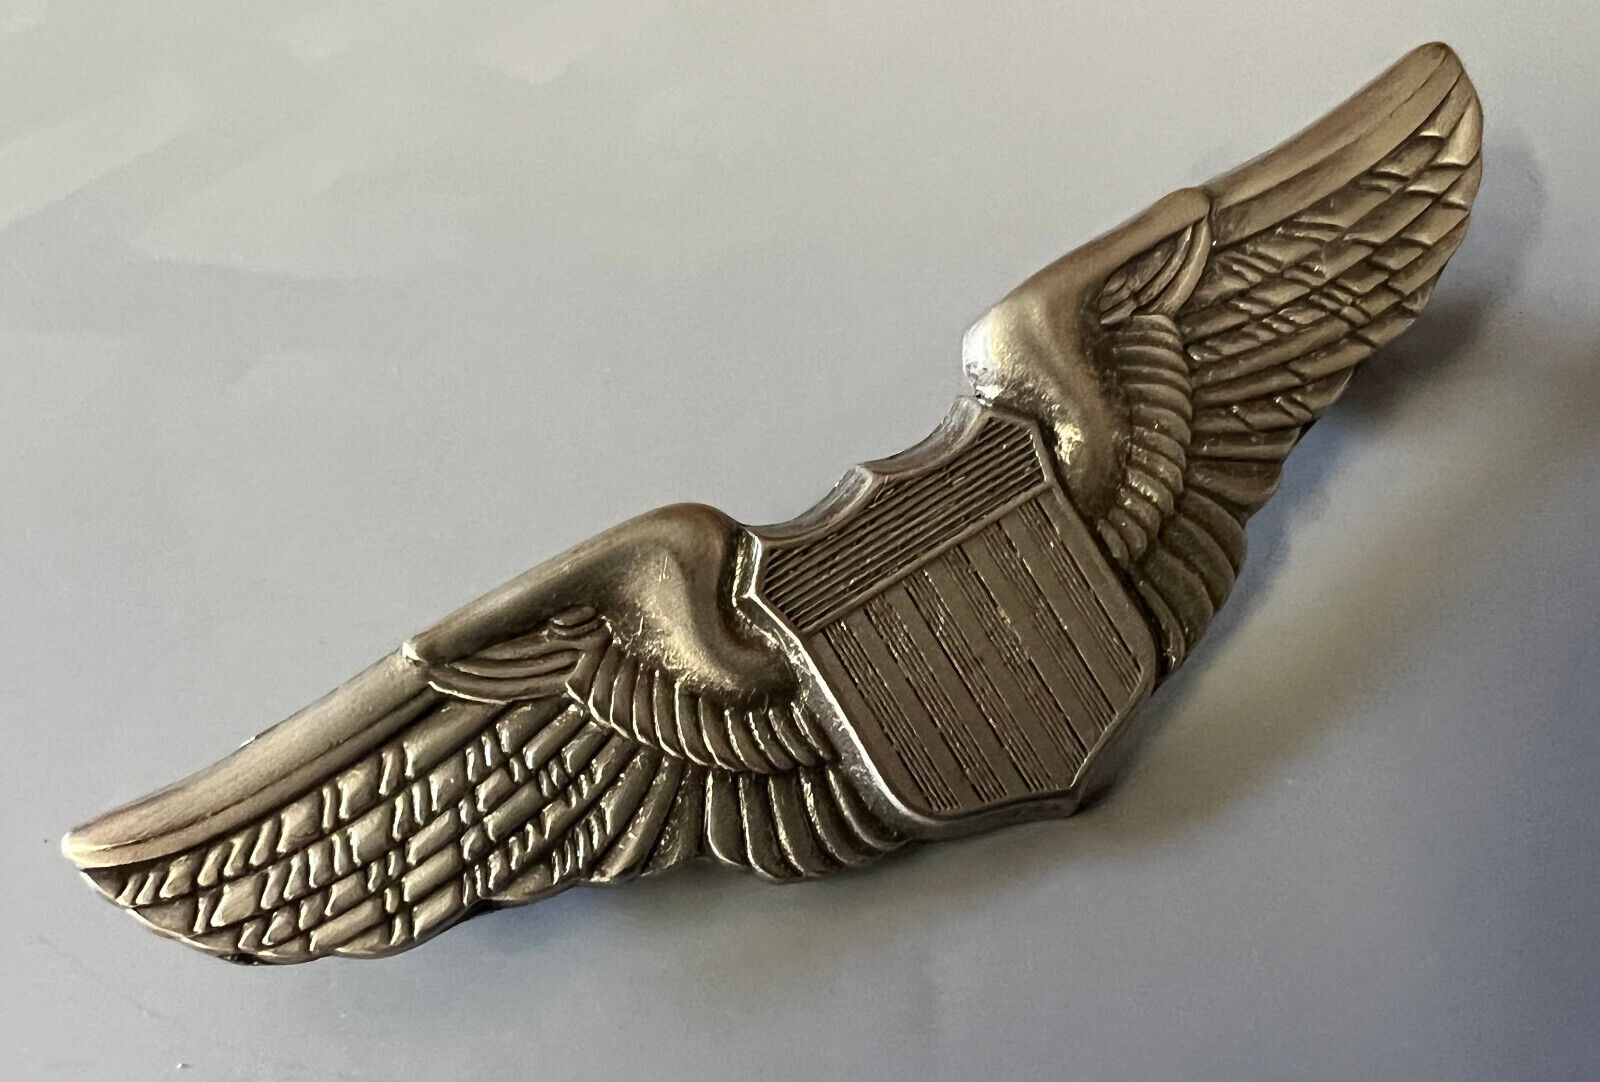 USAAF/USAF PILOT WINGS FULL SIZE 3 INCH